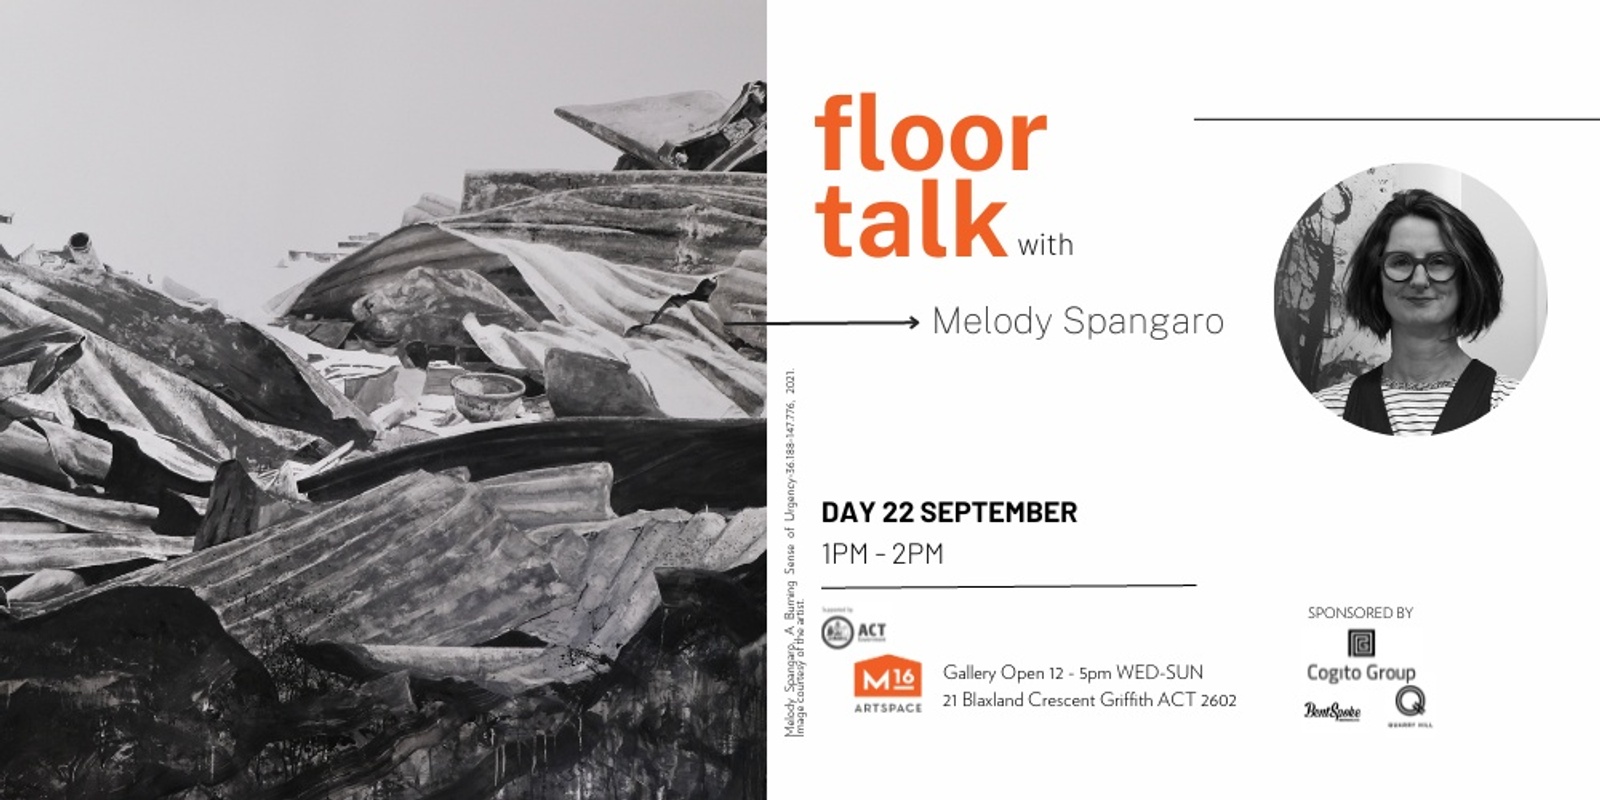 Banner image for [𝘿𝙚]𝘾𝙤𝙣𝙨𝙩𝙧𝙪𝙘𝙩𝙚𝙙 𝙇𝙖𝙣𝙙𝙨𝙘𝙖𝙥𝙚𝙨 Floor talk with Melody Spangaro | M16 Artspace 